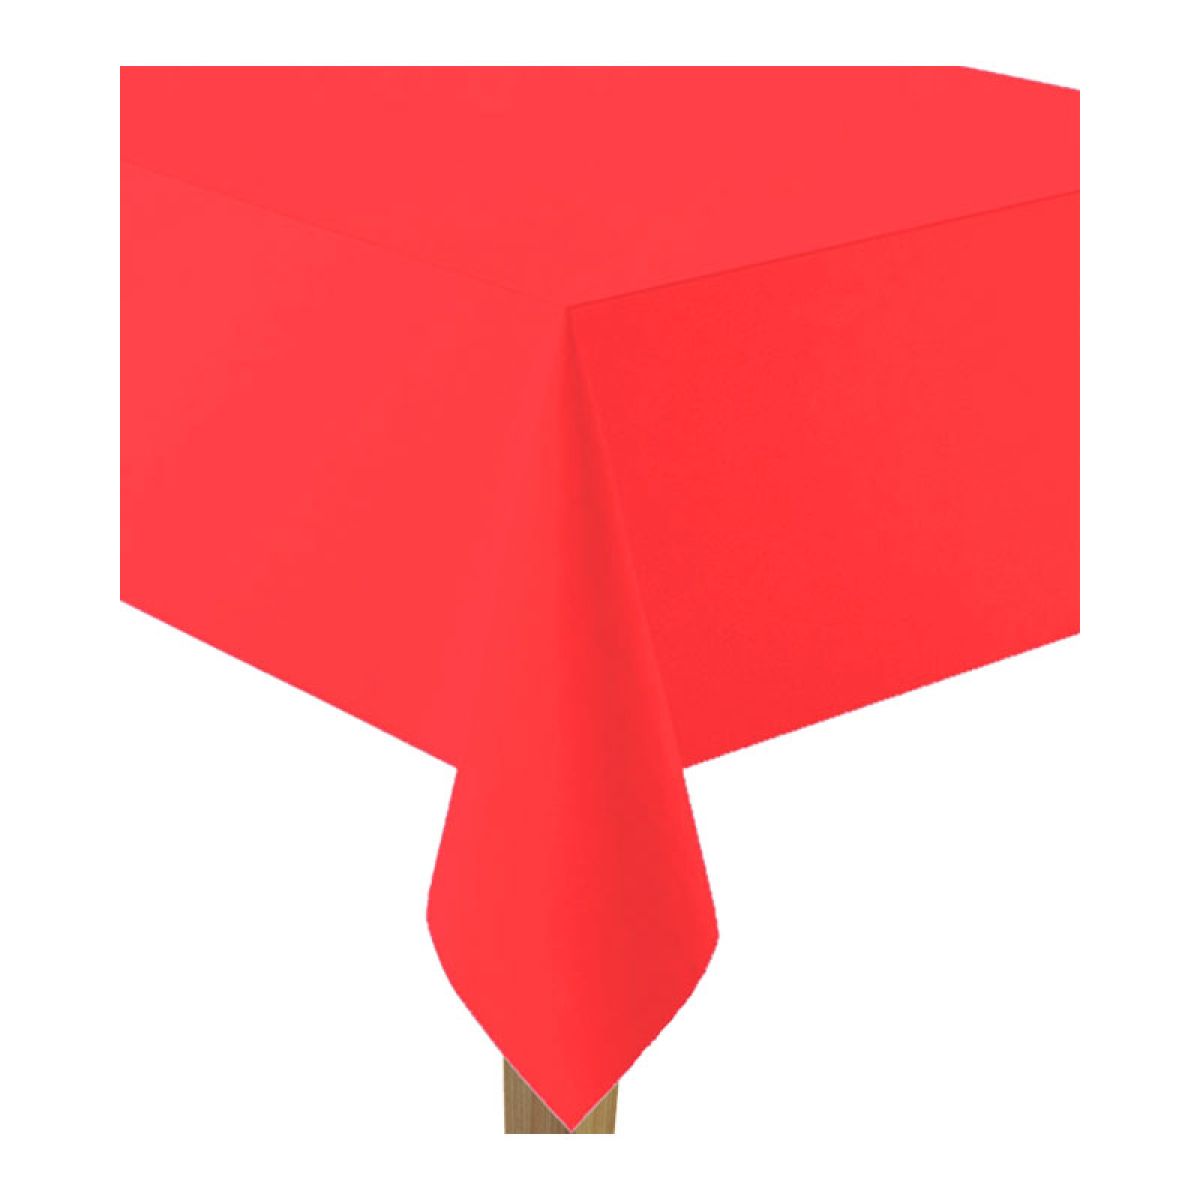 Red Plastic Table Cover - 2.8m x 1.4m